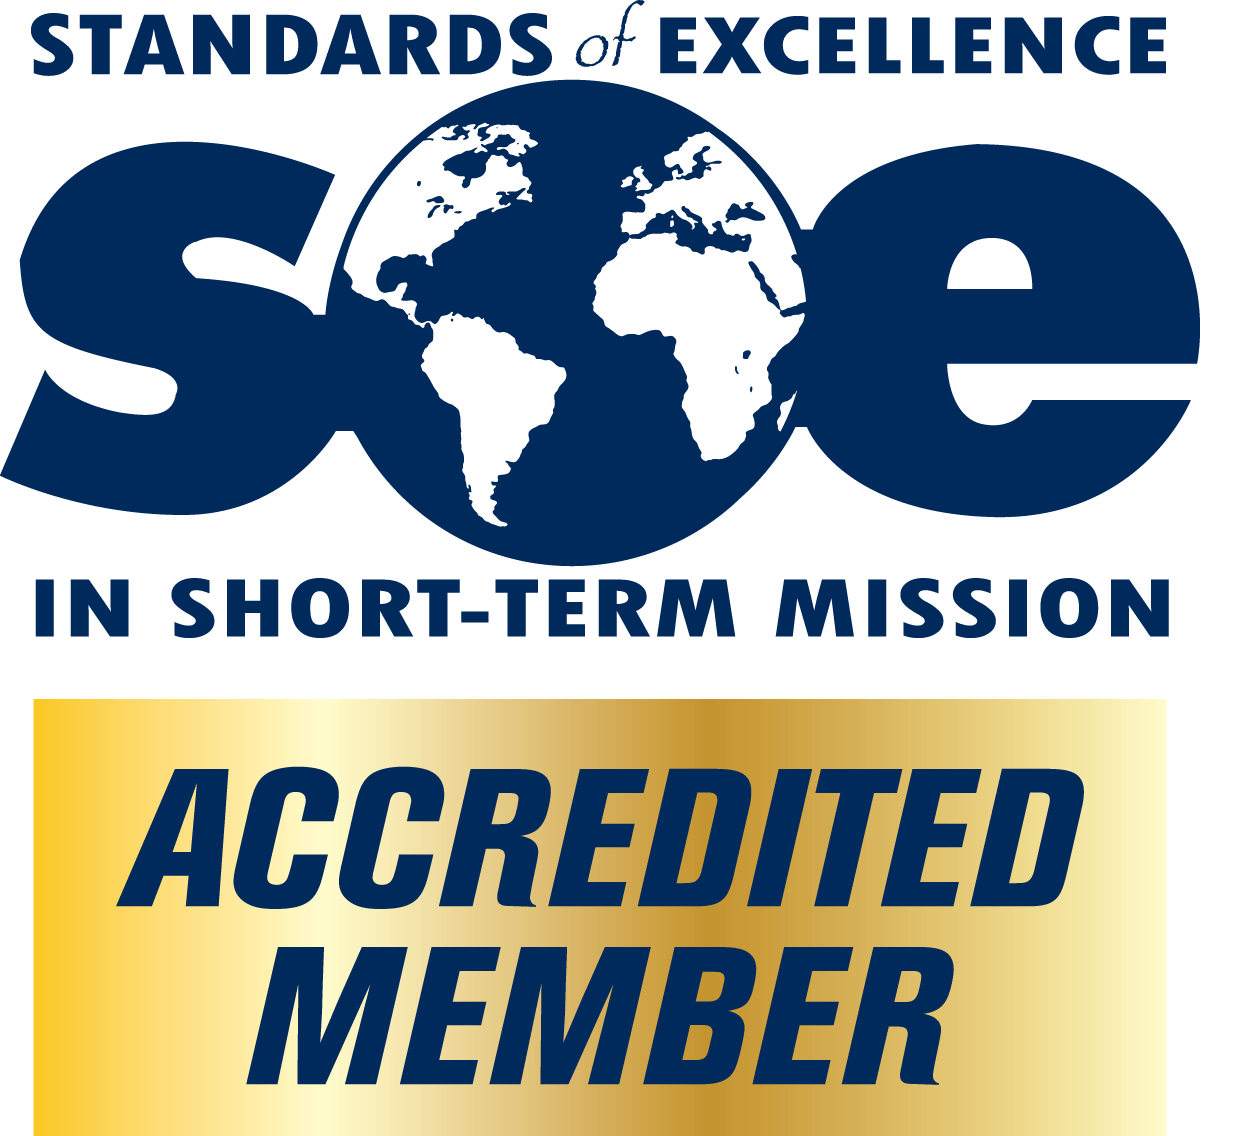 Award for Being an Accredited Member of the Standards of Excellence in Short-Term Missions.